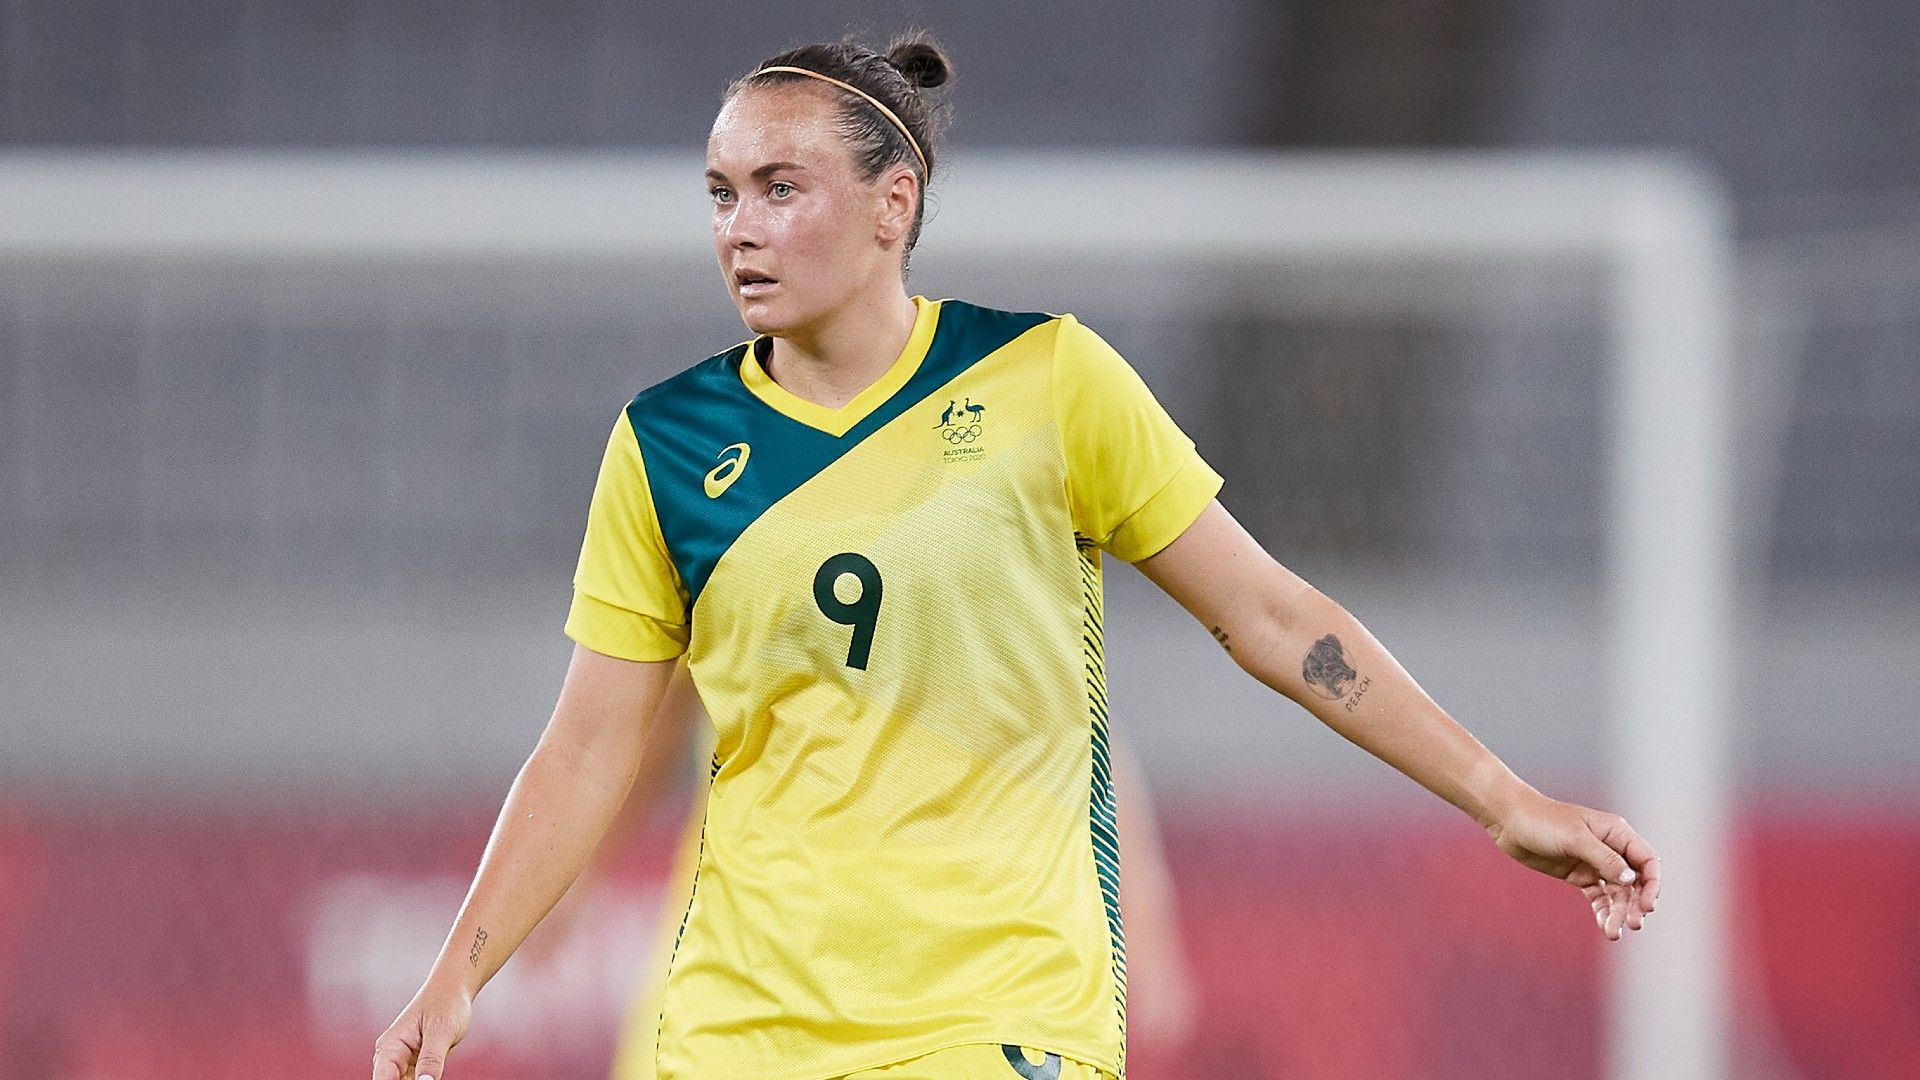 Matildas announce squad for two-match series against Brazil